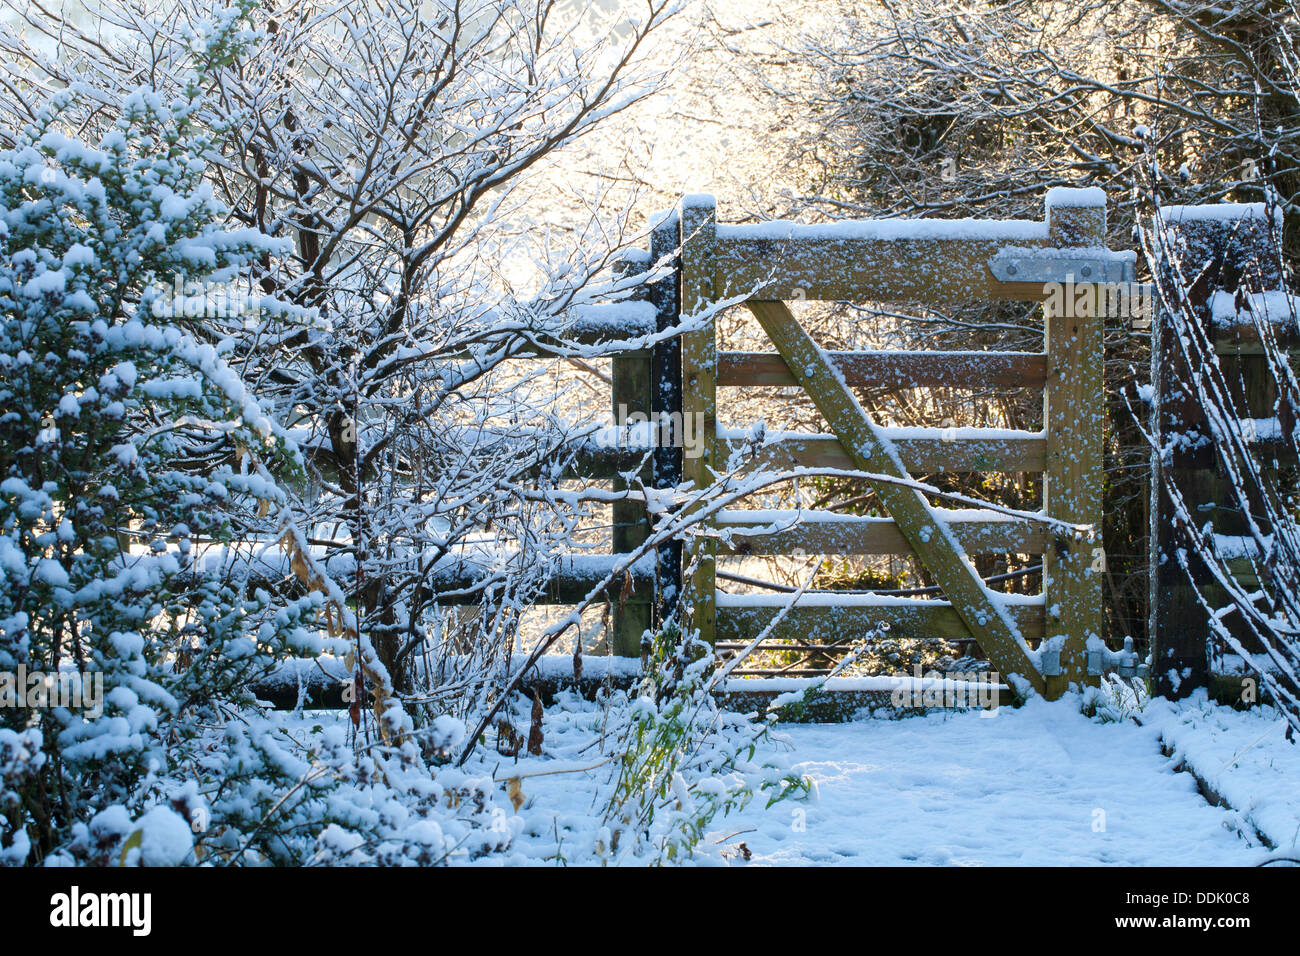 Gate in a garden in winter after a fall of snow. Powys, Wales. January. Stock Photo